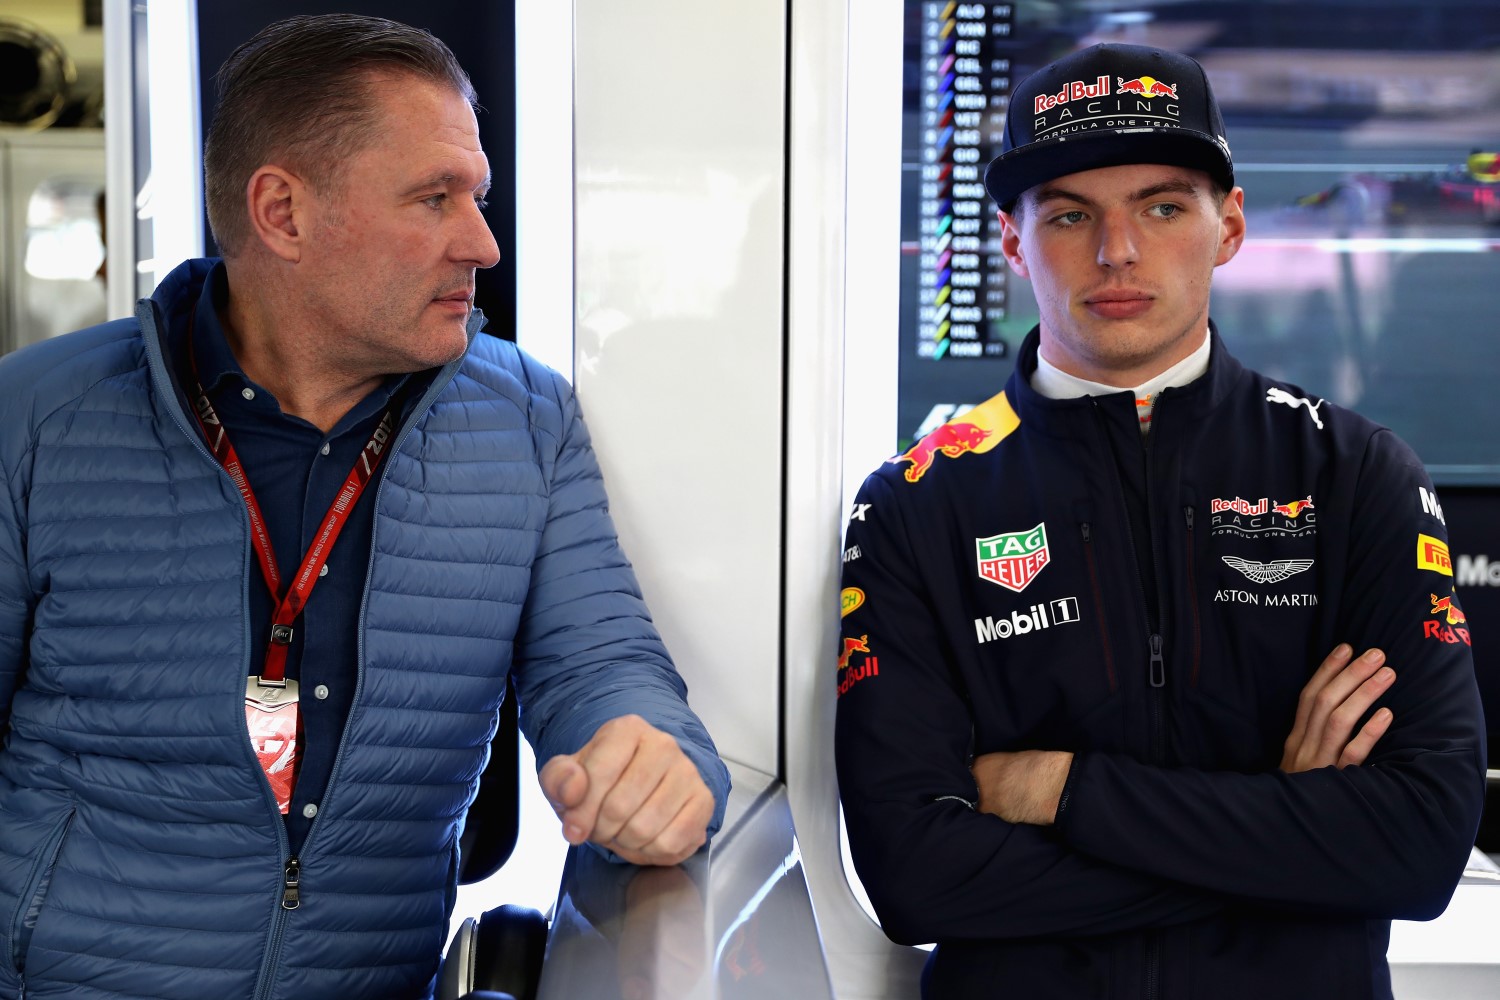 Father Jos and son Max Verstappen wait to hear about possible penalty. He was cleared.